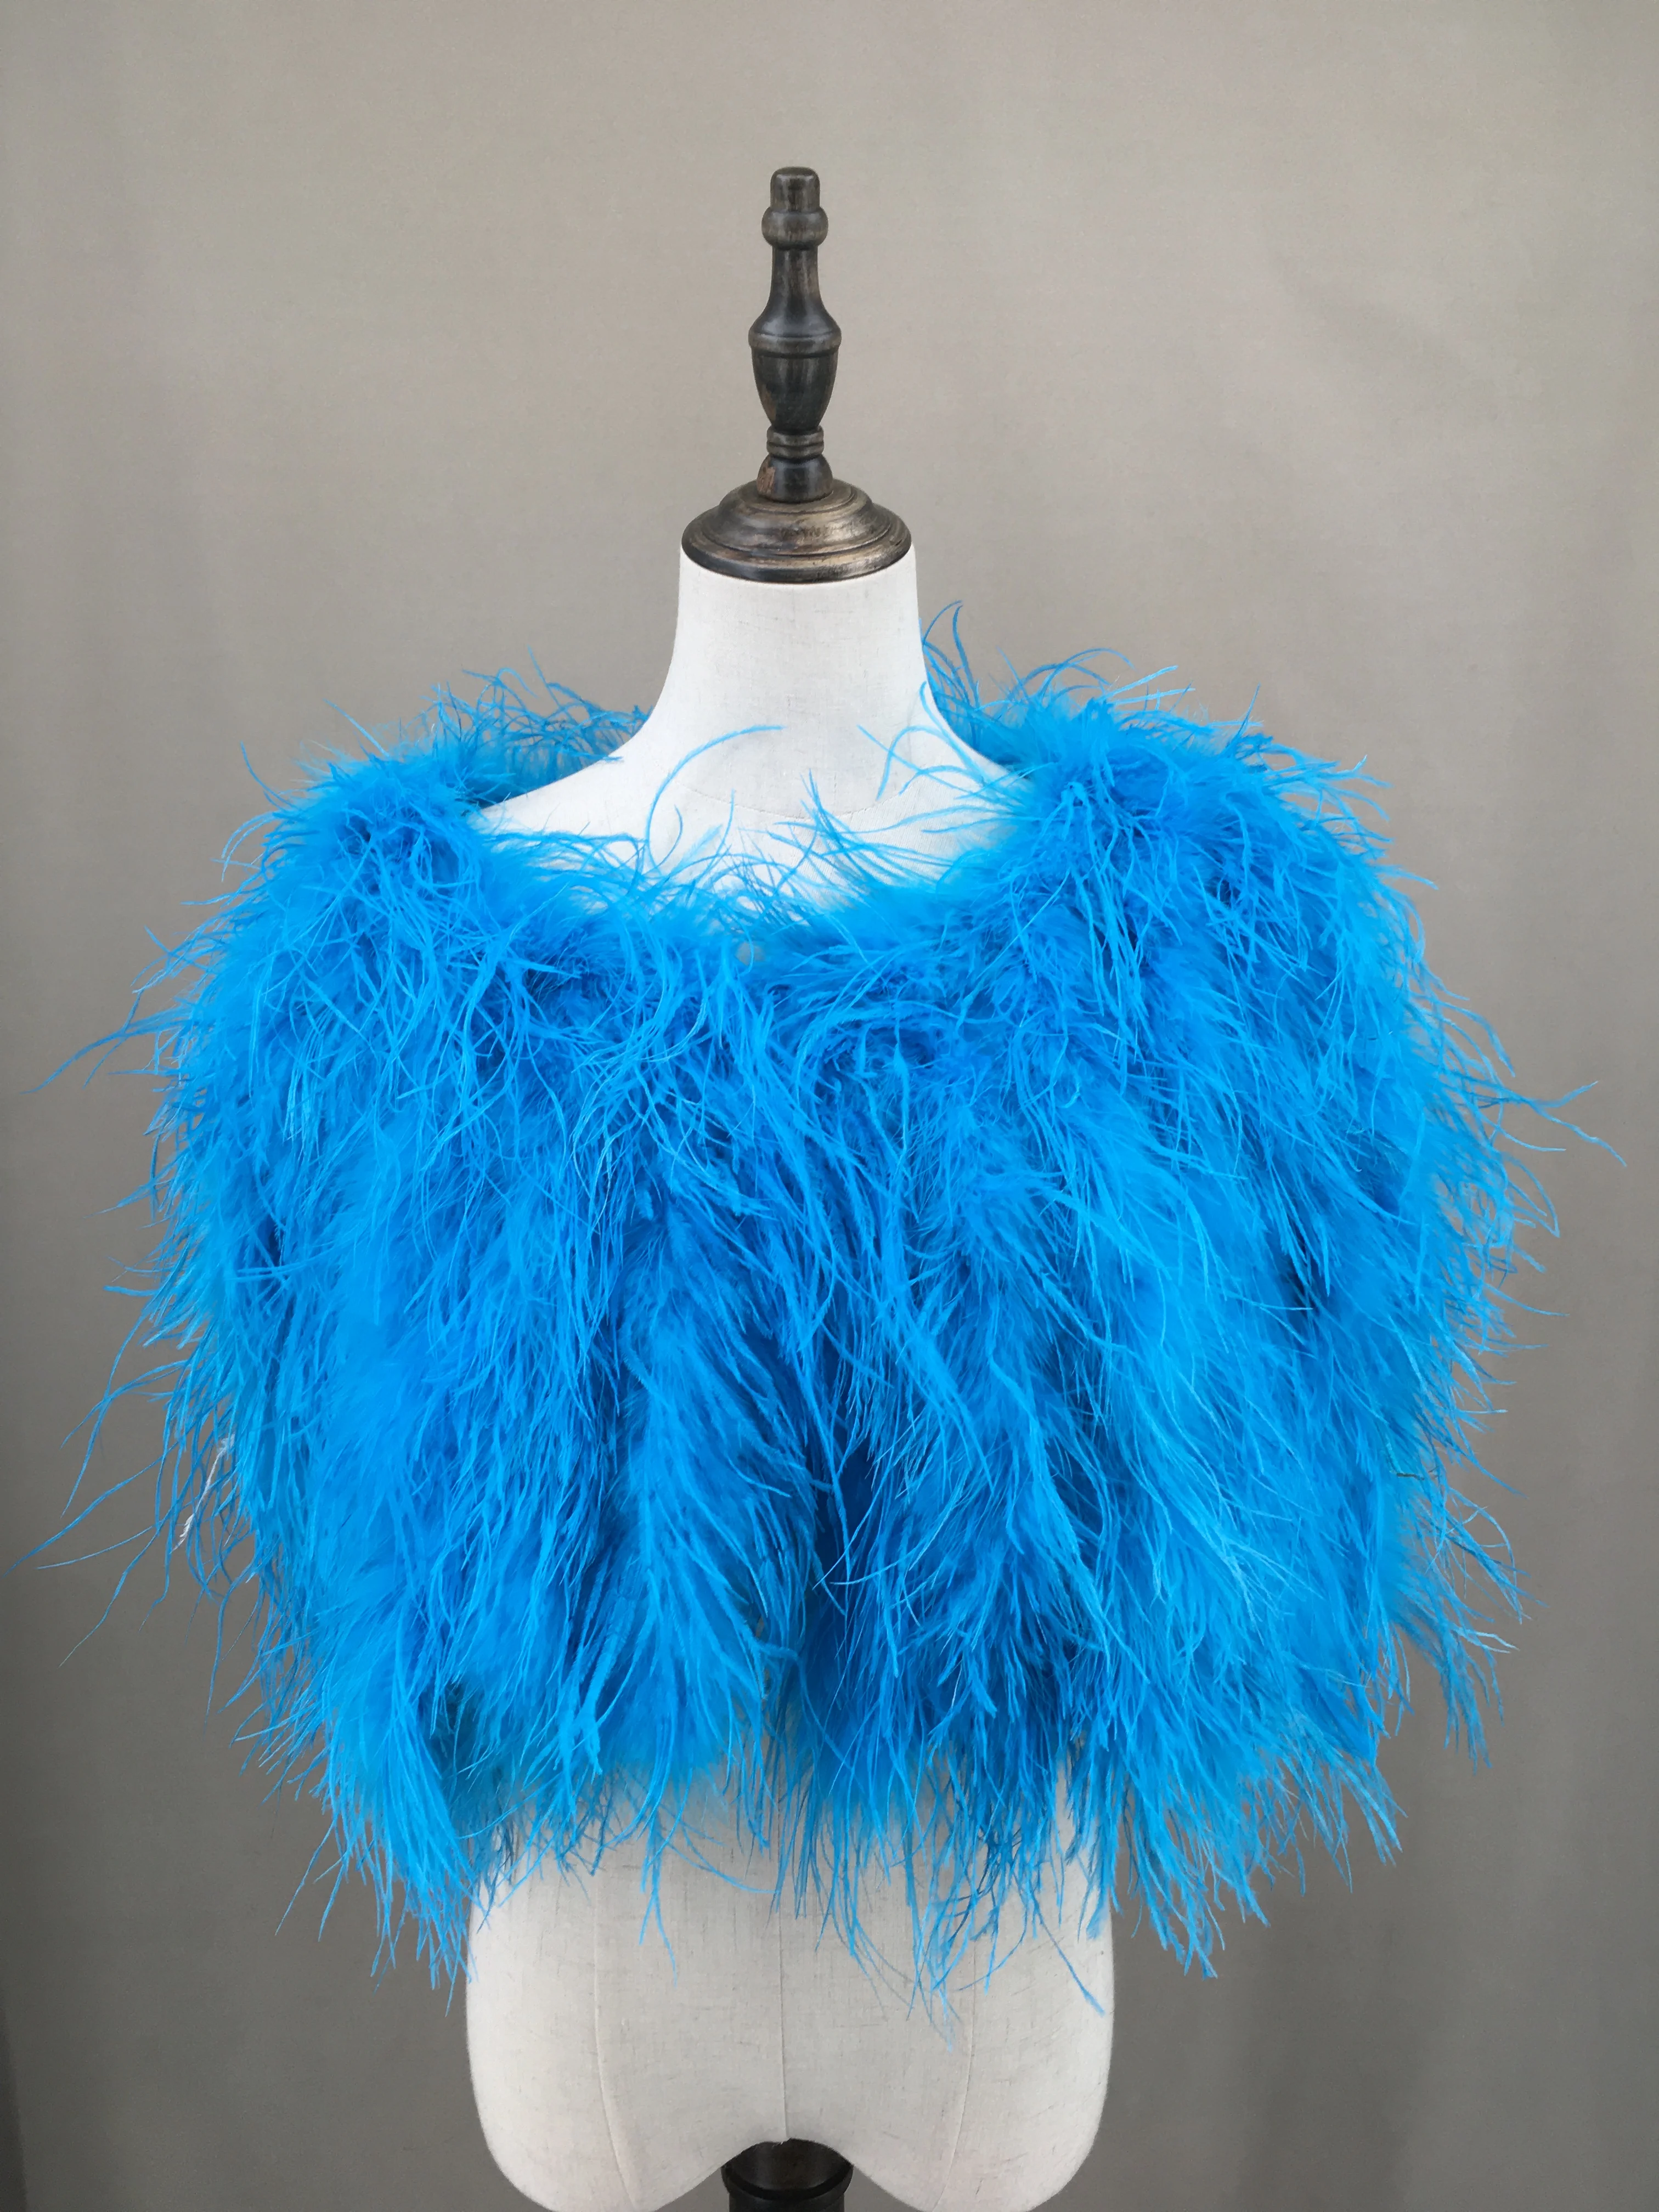 

stock on sale ostrich feather cape shawl for party dinner lake blue furry fluffy romantic luxurious bridsmaid wedding